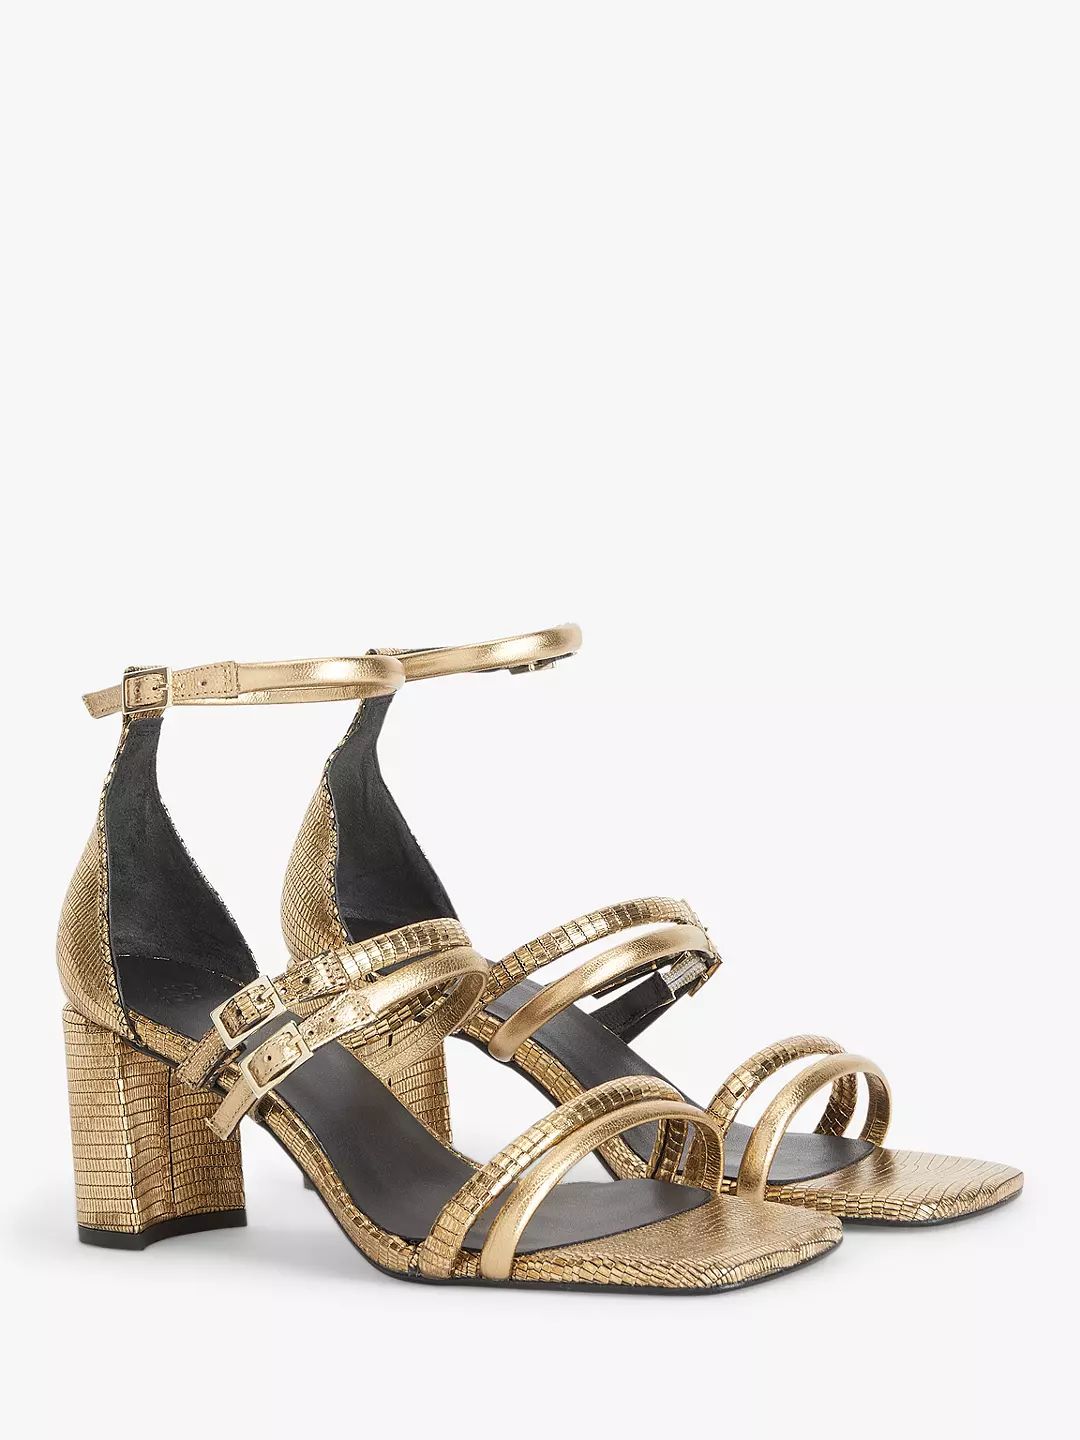 AND/OR Mystic Strappy Buckle Trim Sandals, Gold | John Lewis (UK)